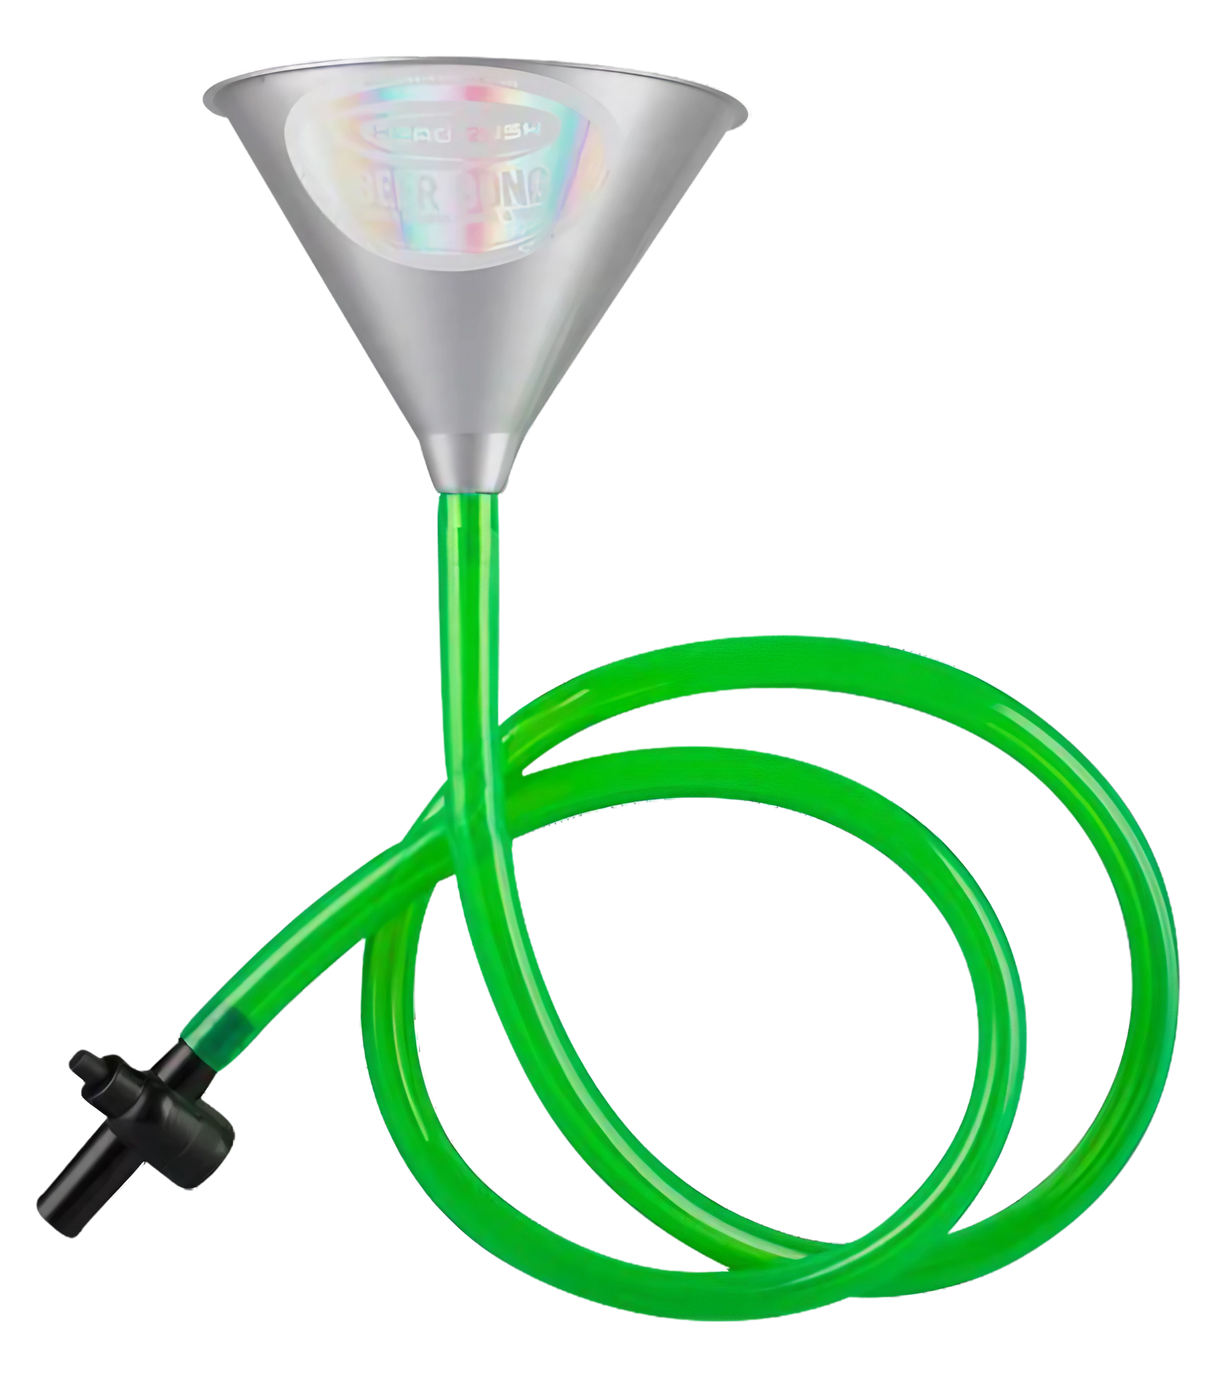 6-Foot Party Beer Bong with Single Funnel & Toggle Valve